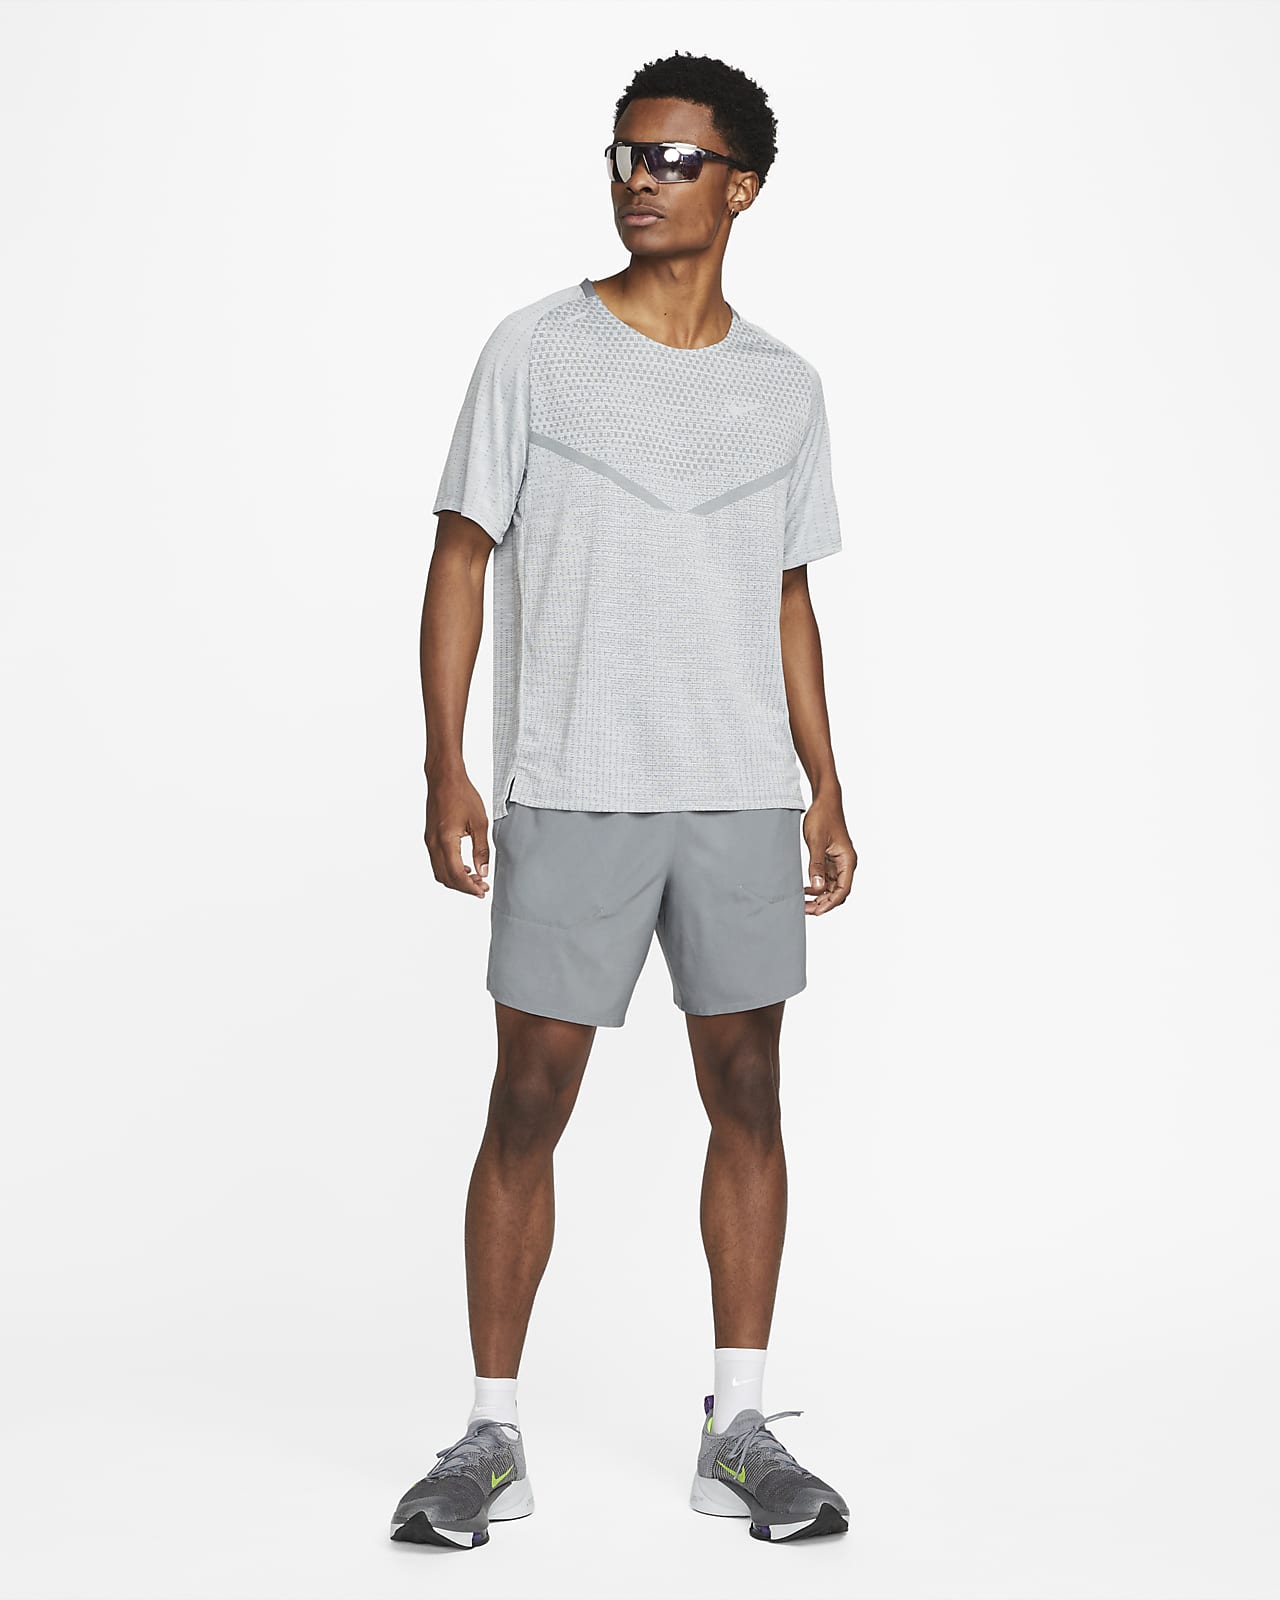  Nike Active Recovery Dri-FIT Short Sleeve Top Light Smoke  Grey/Heather/Black SM : Clothing, Shoes & Jewelry